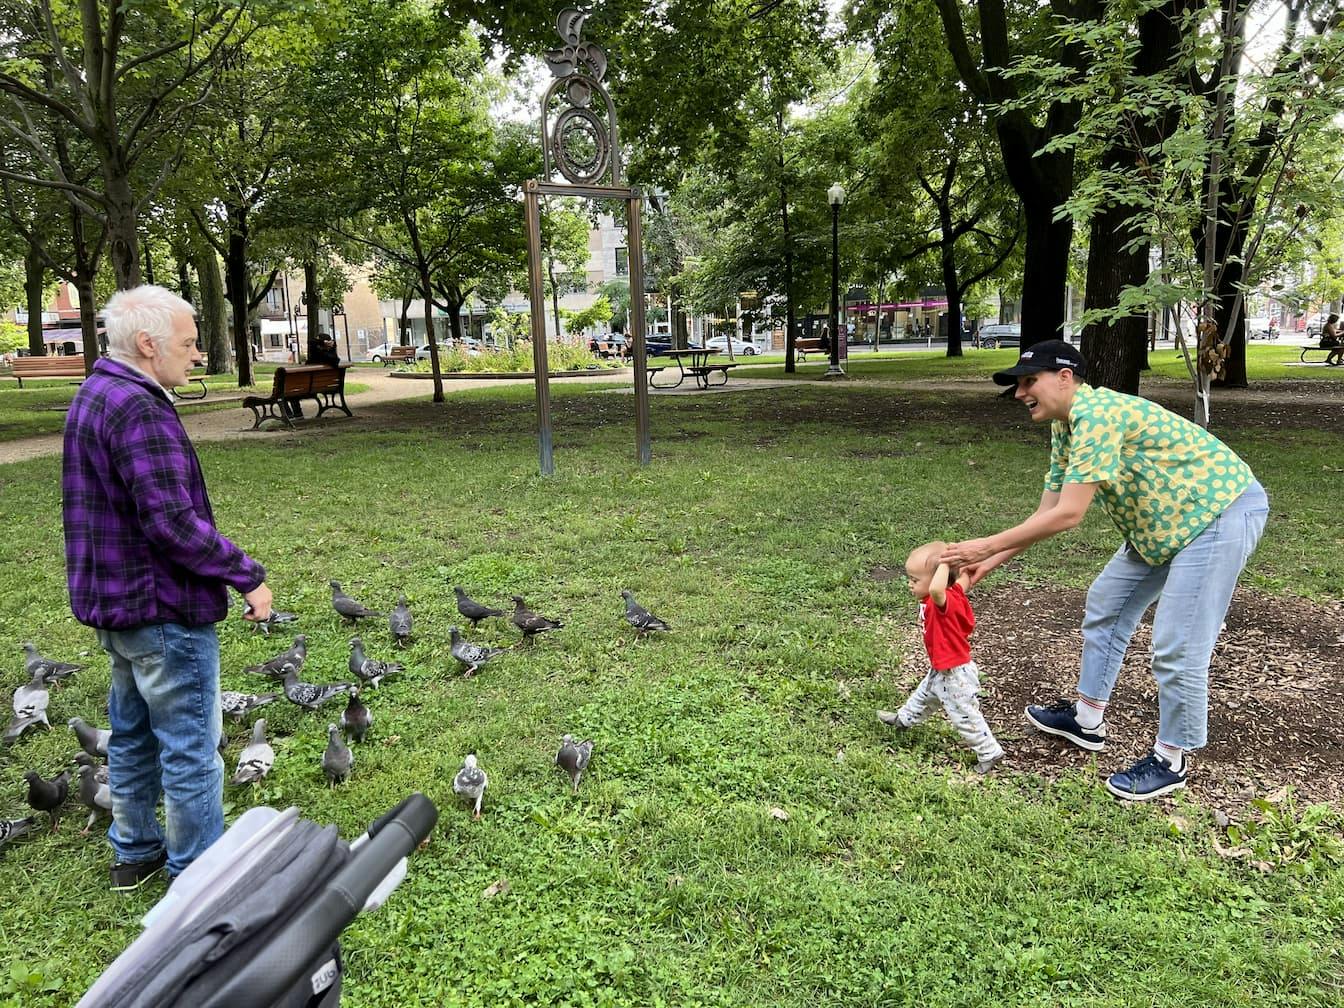 Orlando and Carla taking a walk through Montreal's Parc Lahaie and chatting with a man feeding some birds